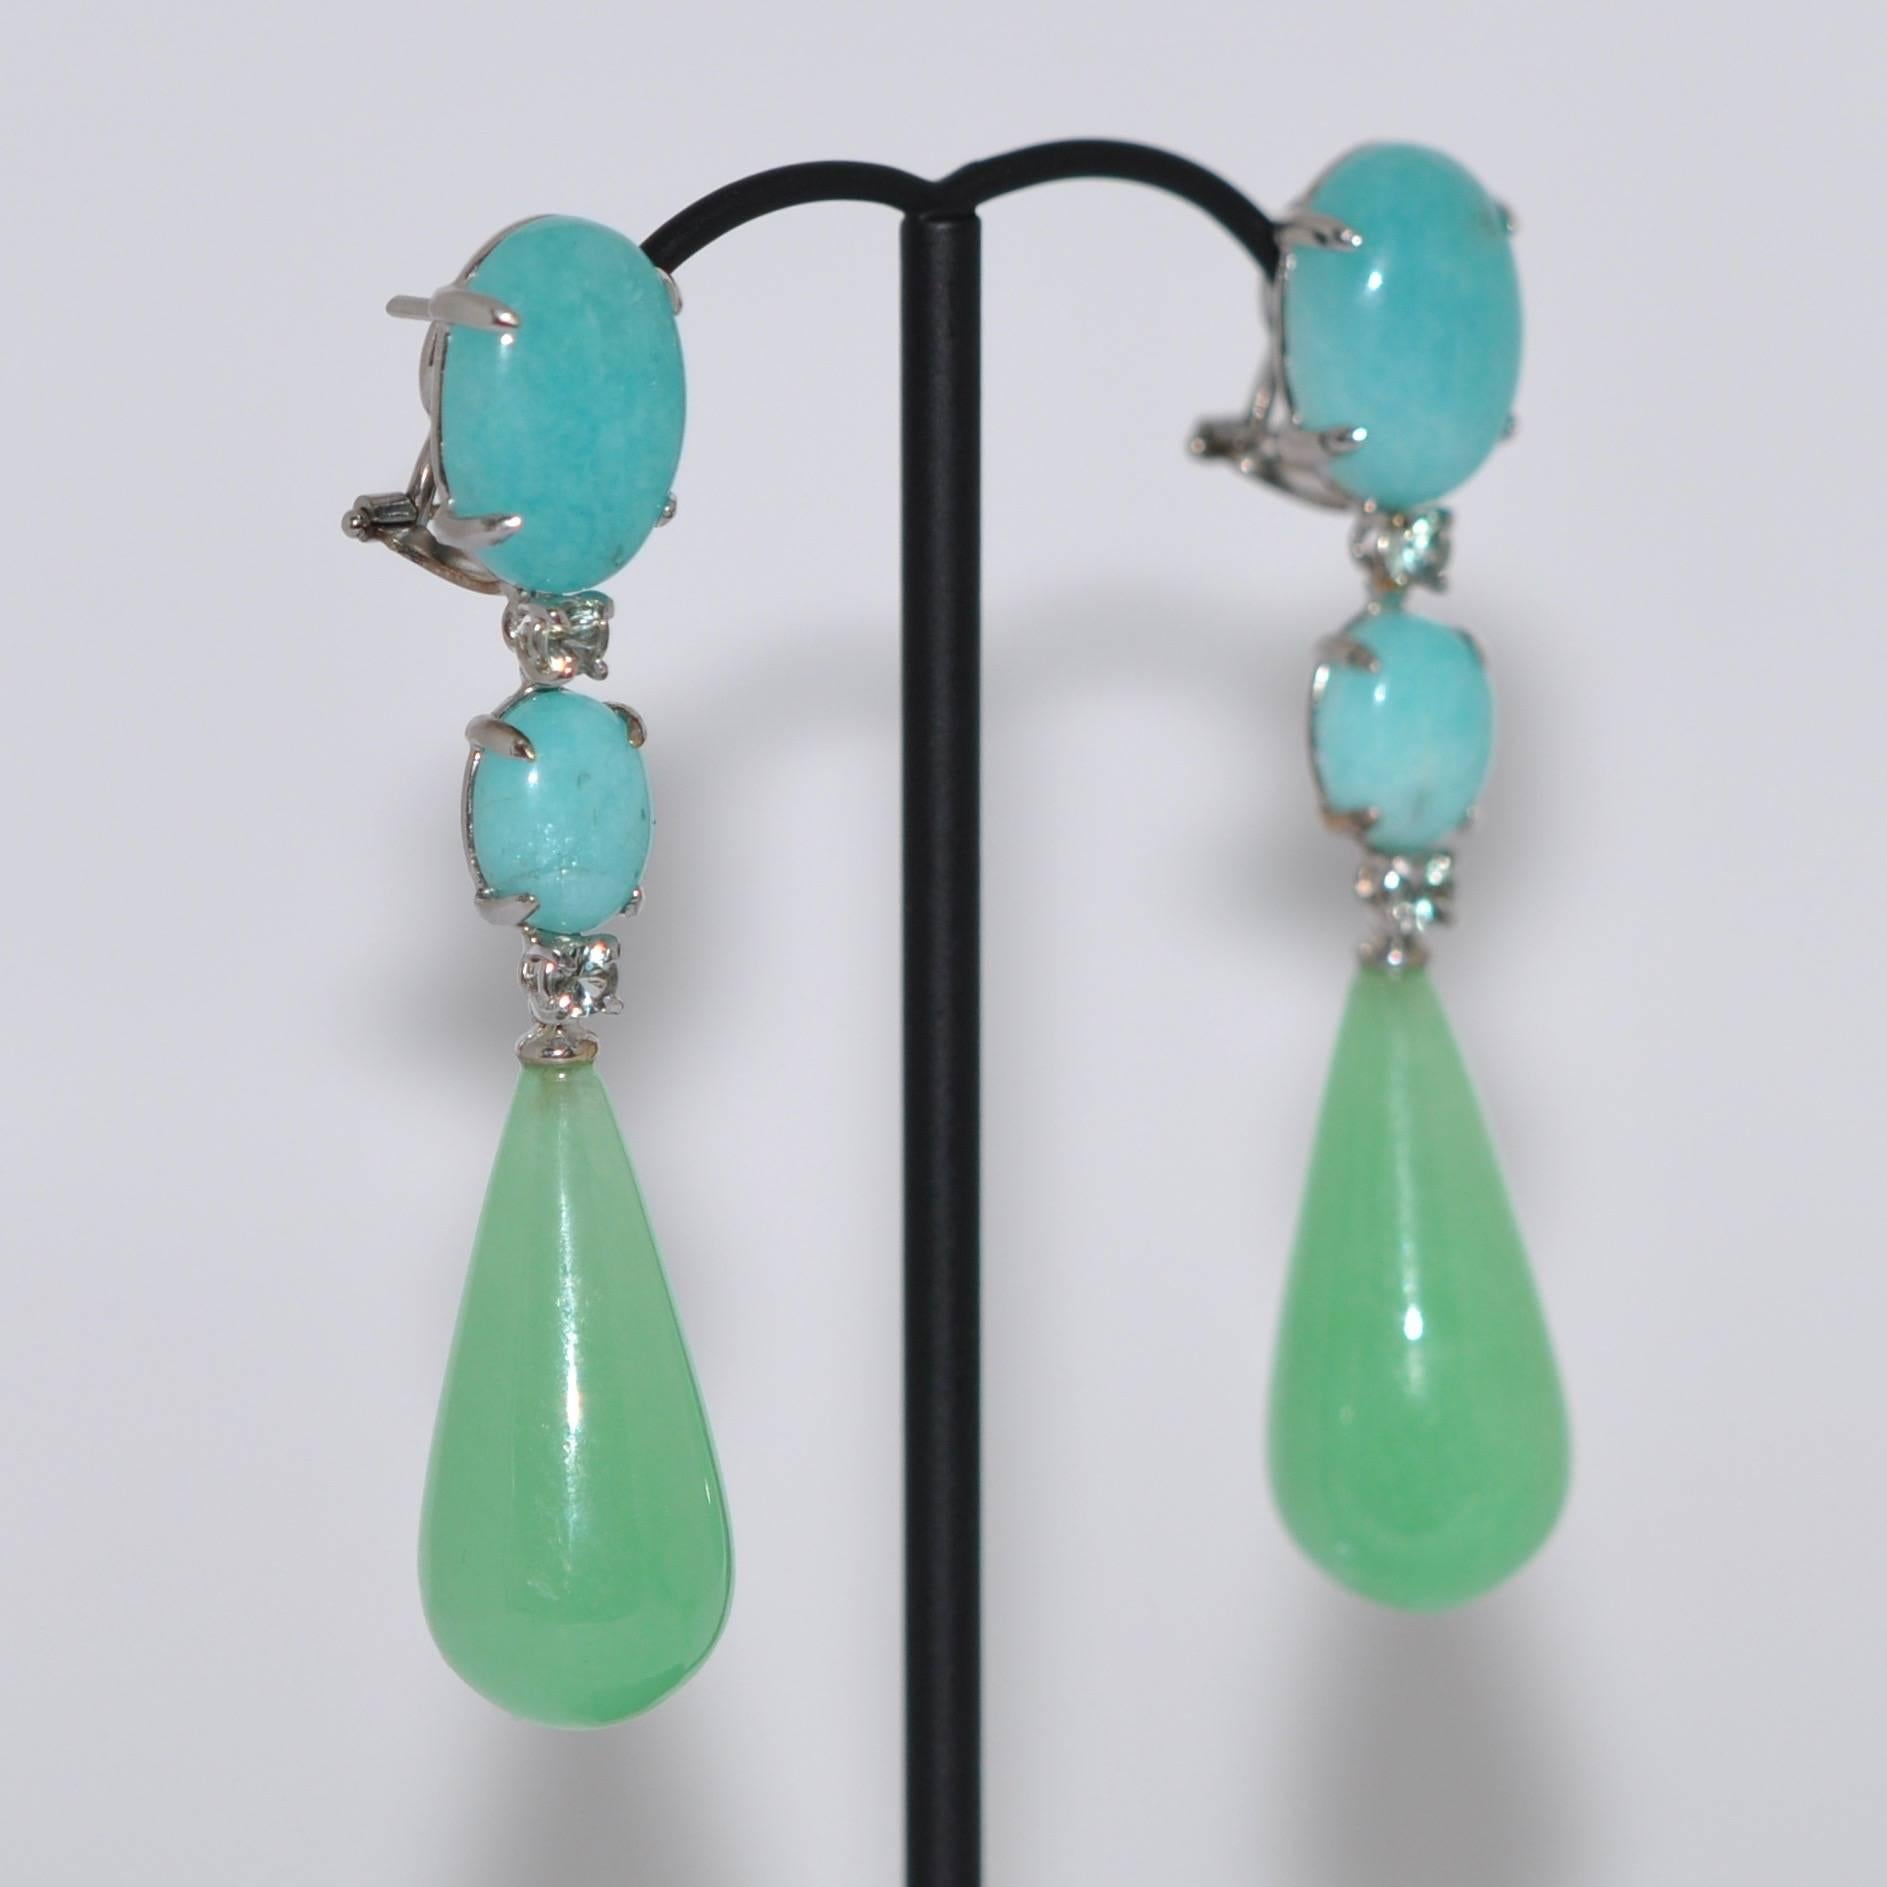 Discover this Jades, Amazonites and Sapphires White Gold Chandelier Earrings.
Jades
Amazonites
Sapphires
White Gold 18 Carat